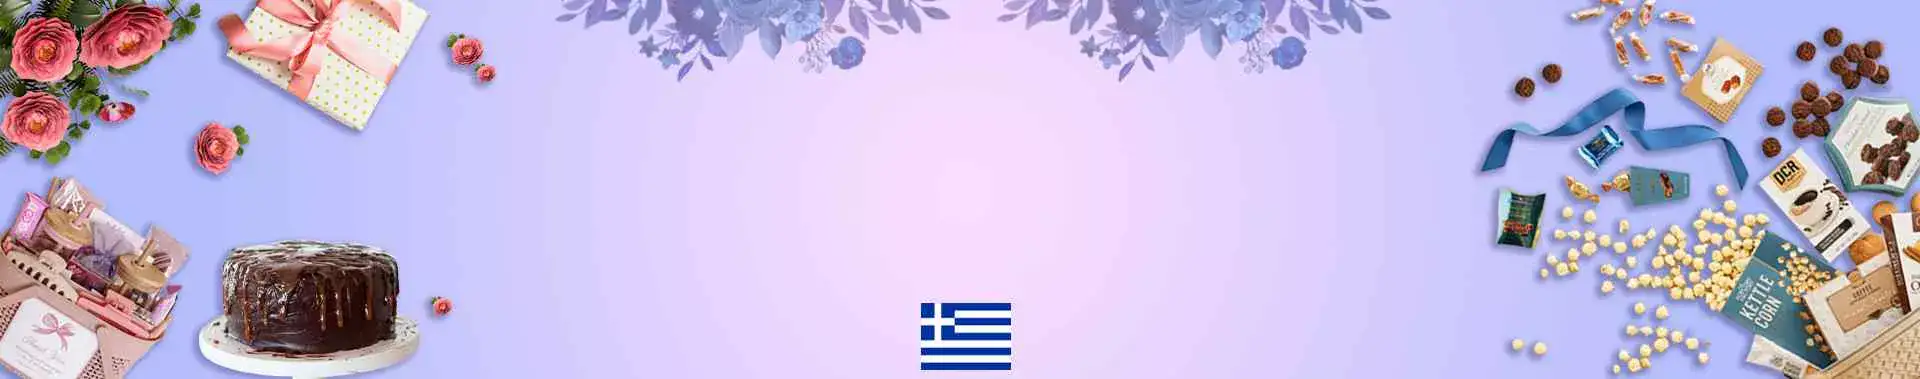 Send Gifts to Greece, Gift Baskets to Greece, Hampers to Greece, Hampers & Gifts delivery in Greece Online